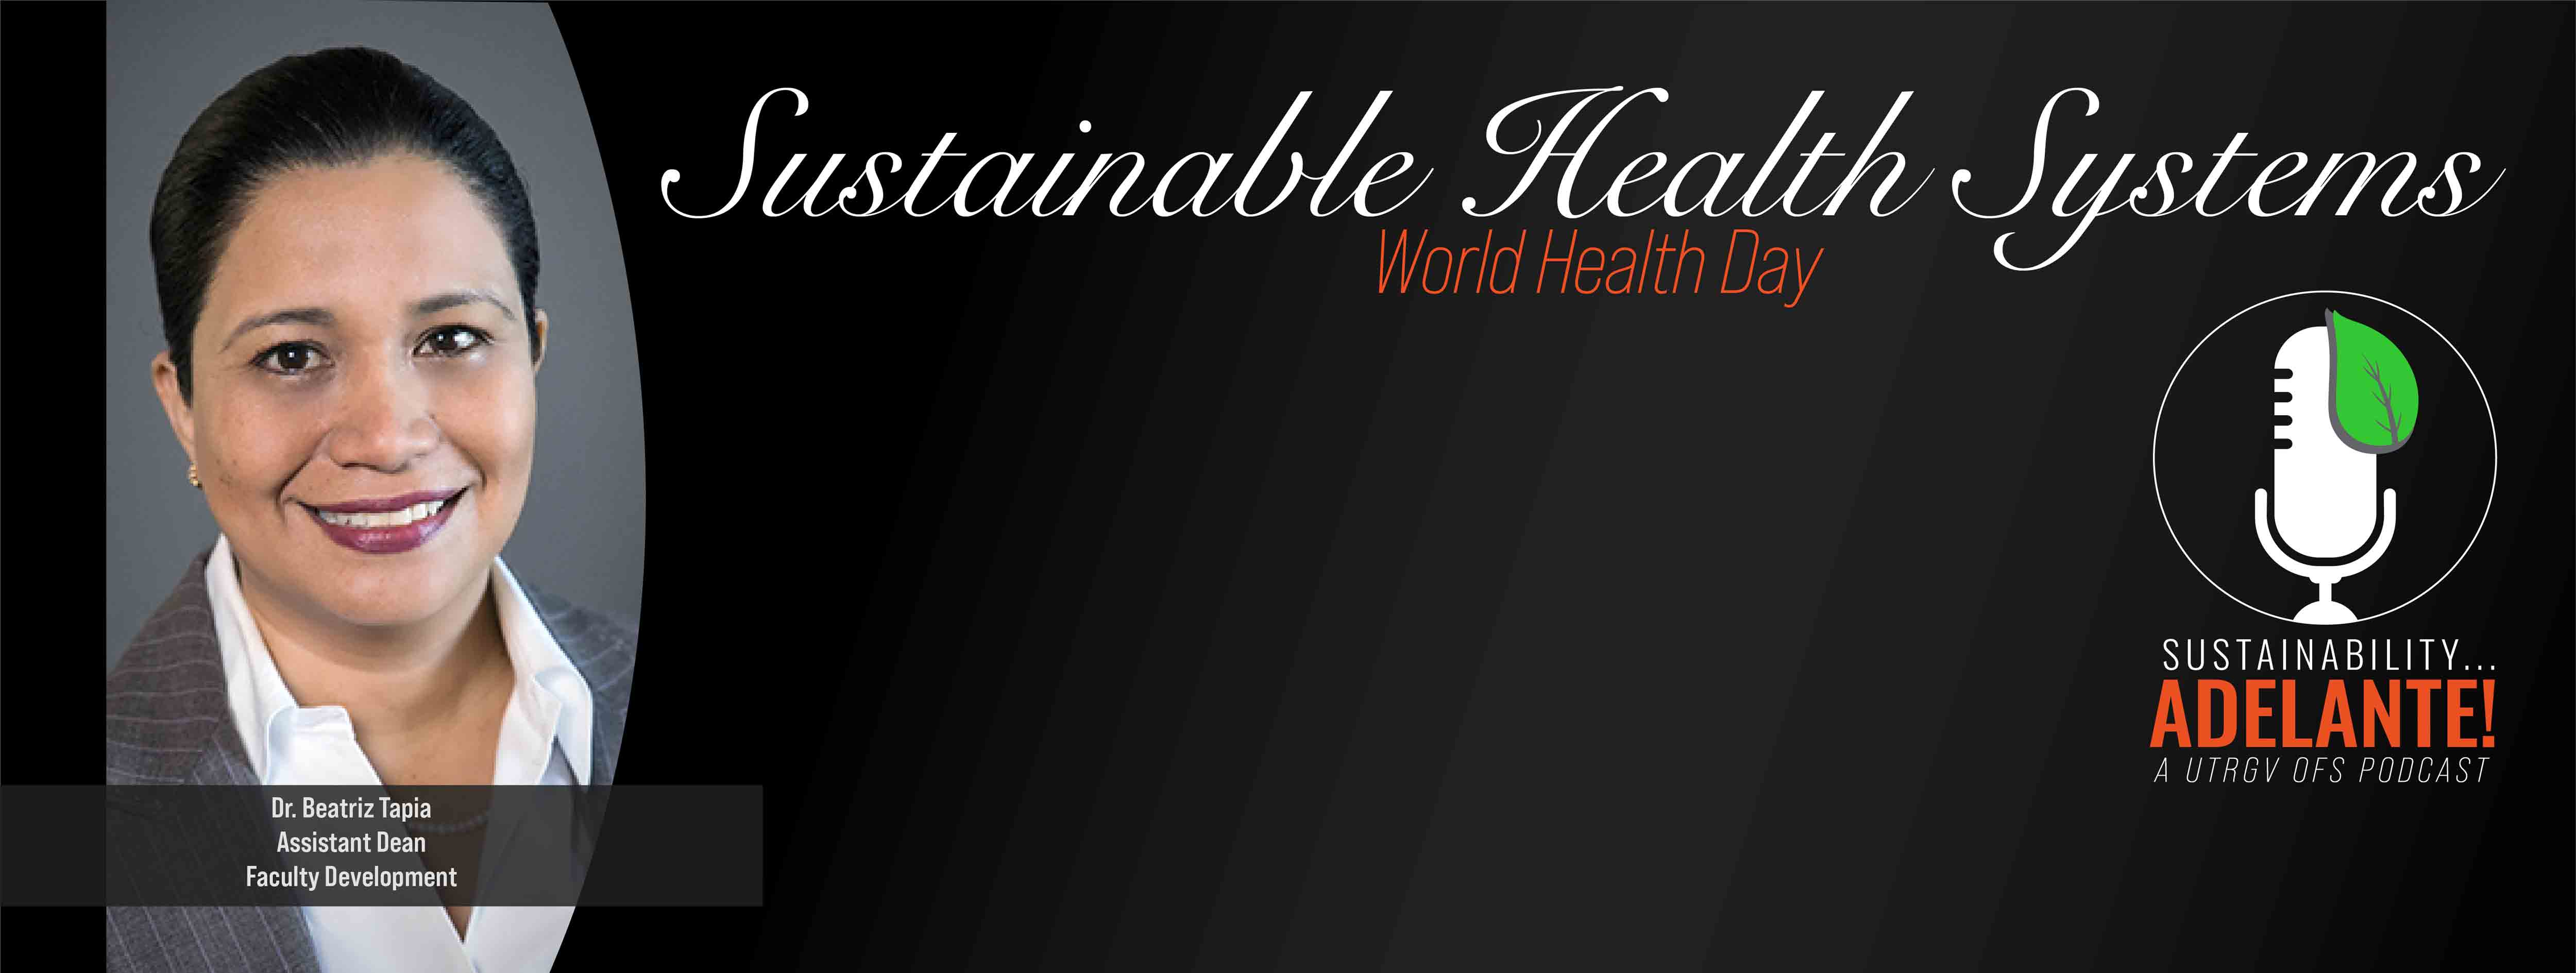 Sustainable Health Systems Sustainability Adelante Podcast with Dr. Beatriz Tapia